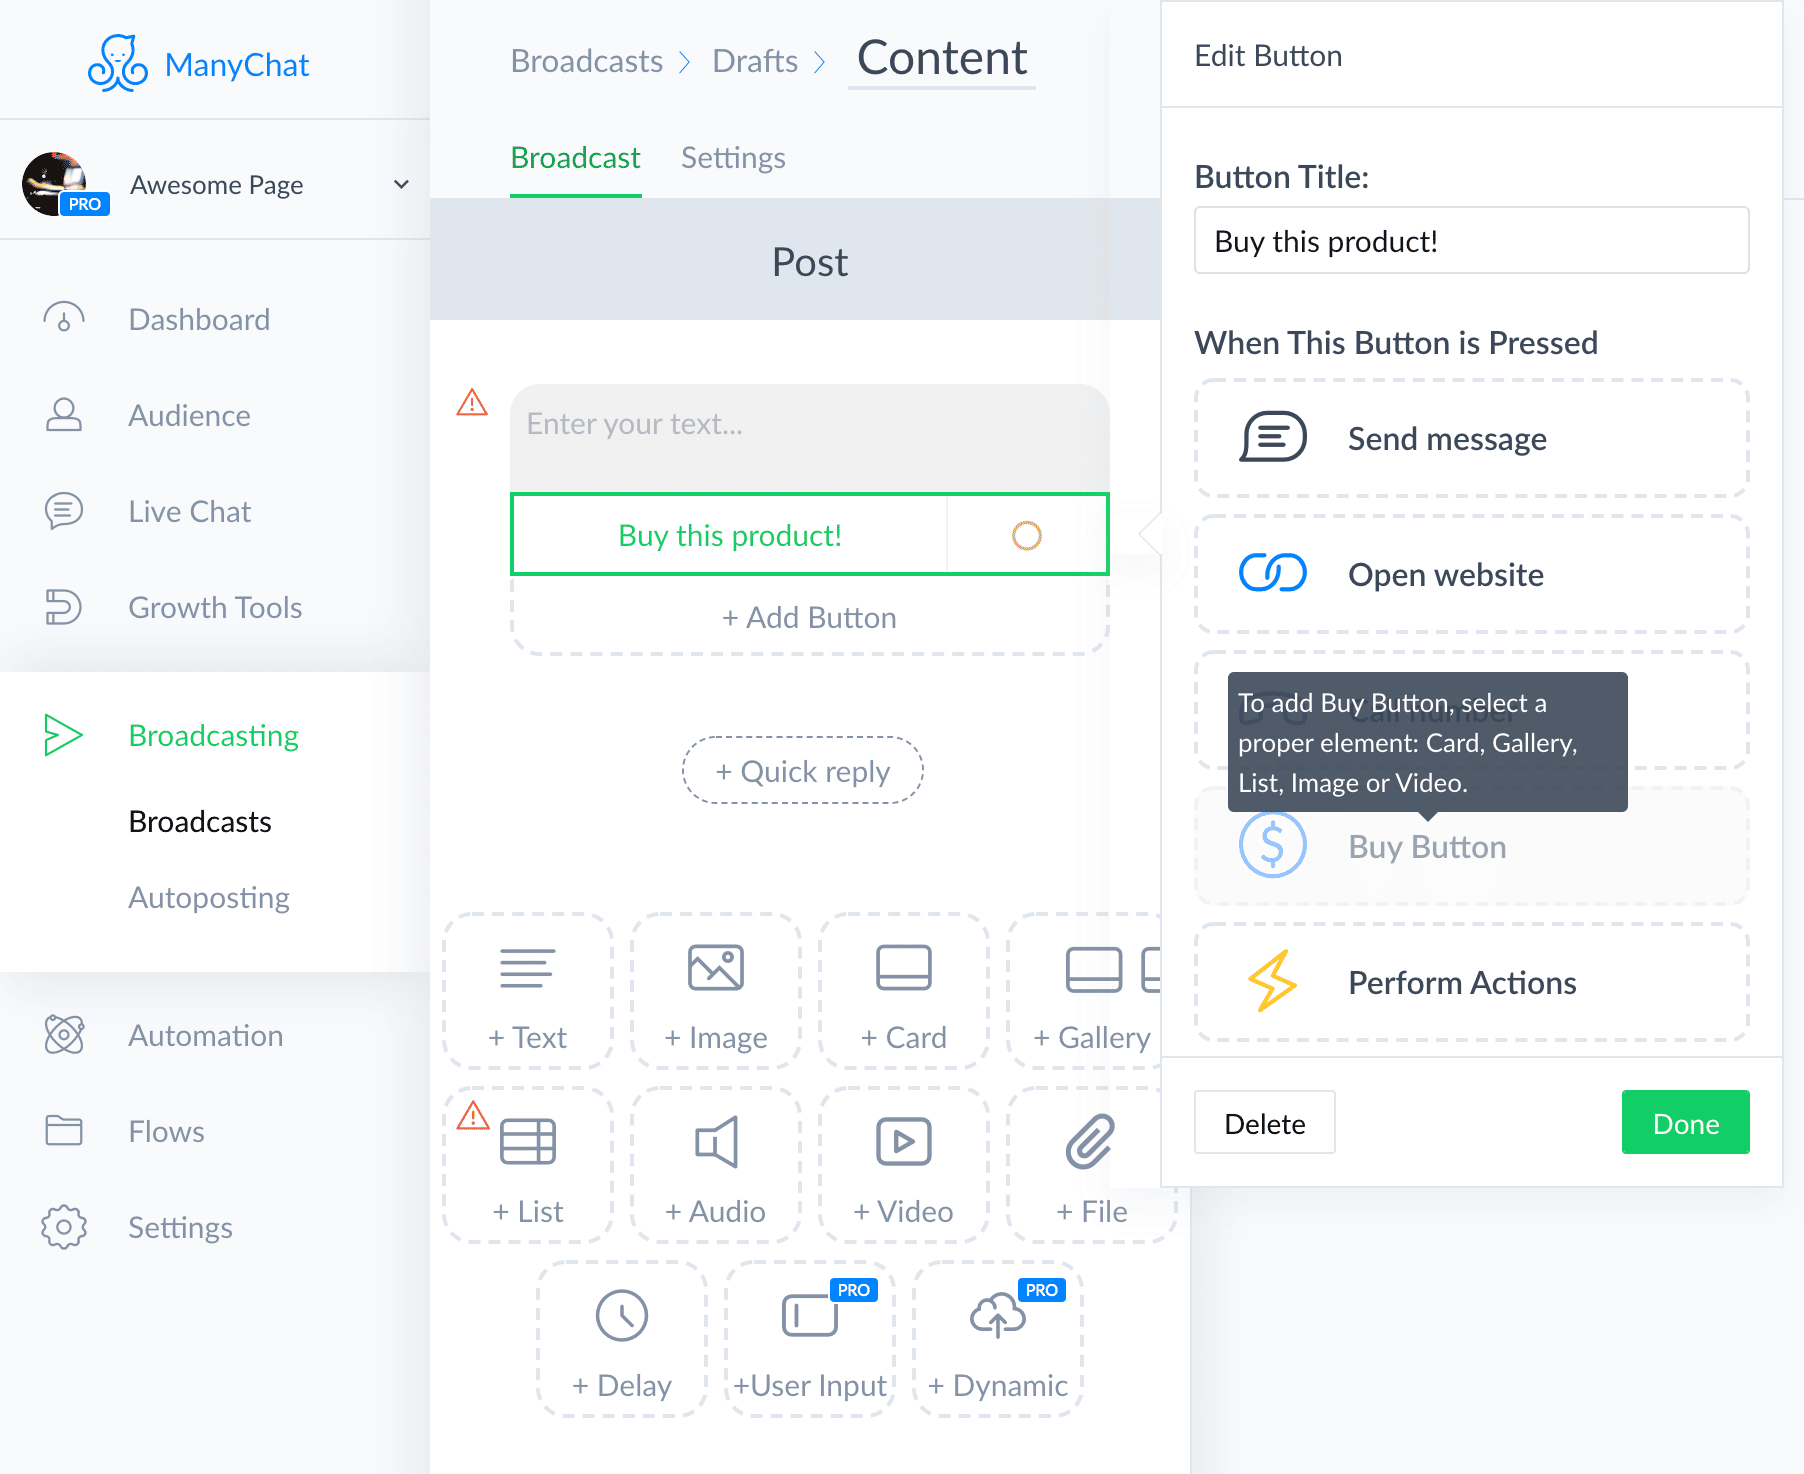 How to add buy button to flow in ManyChat